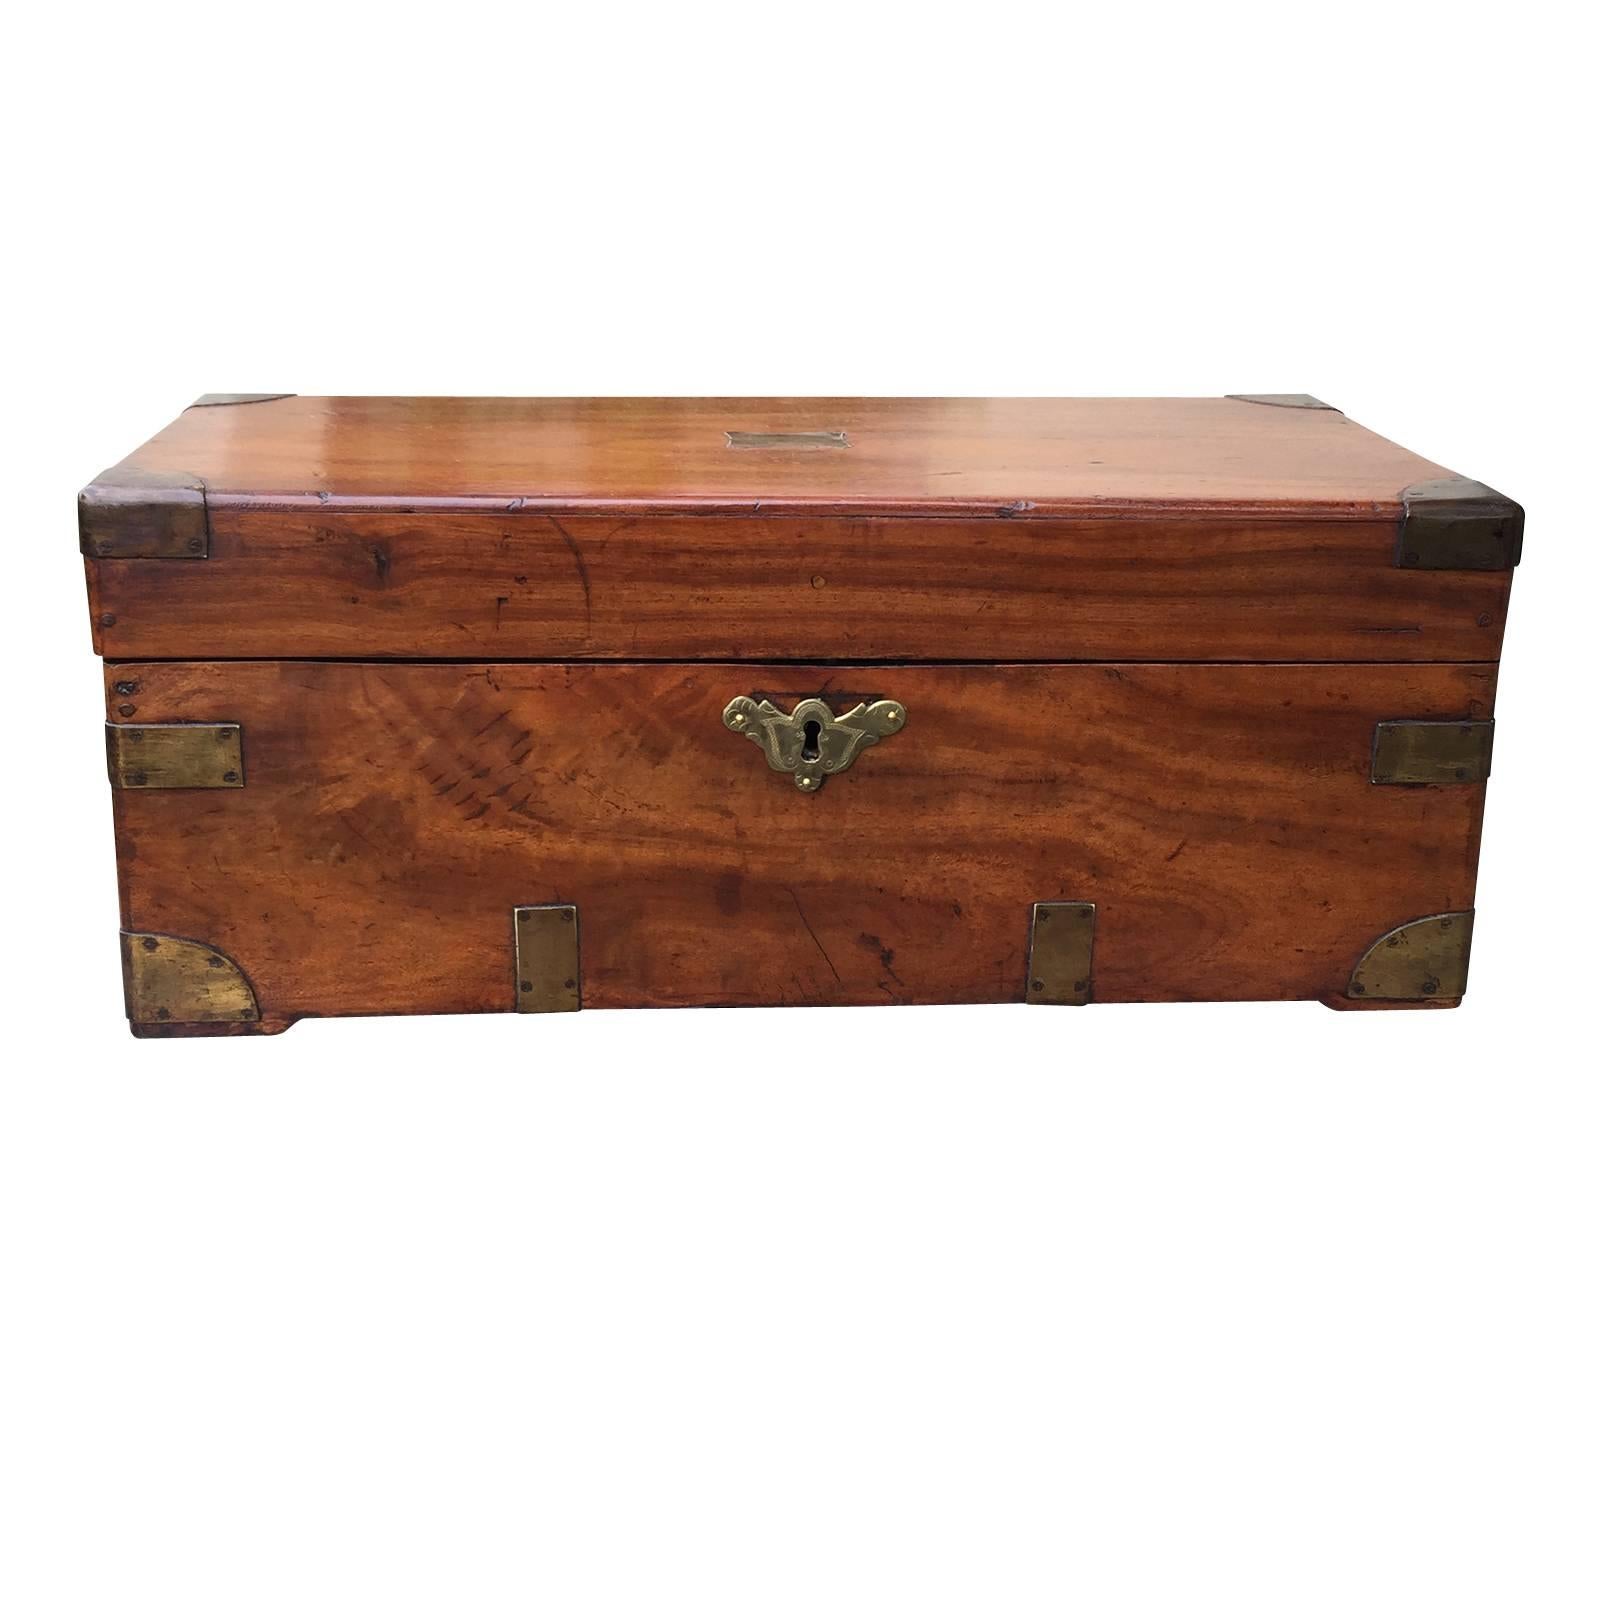 Early 19th Century Small Camphor Wood Trunk